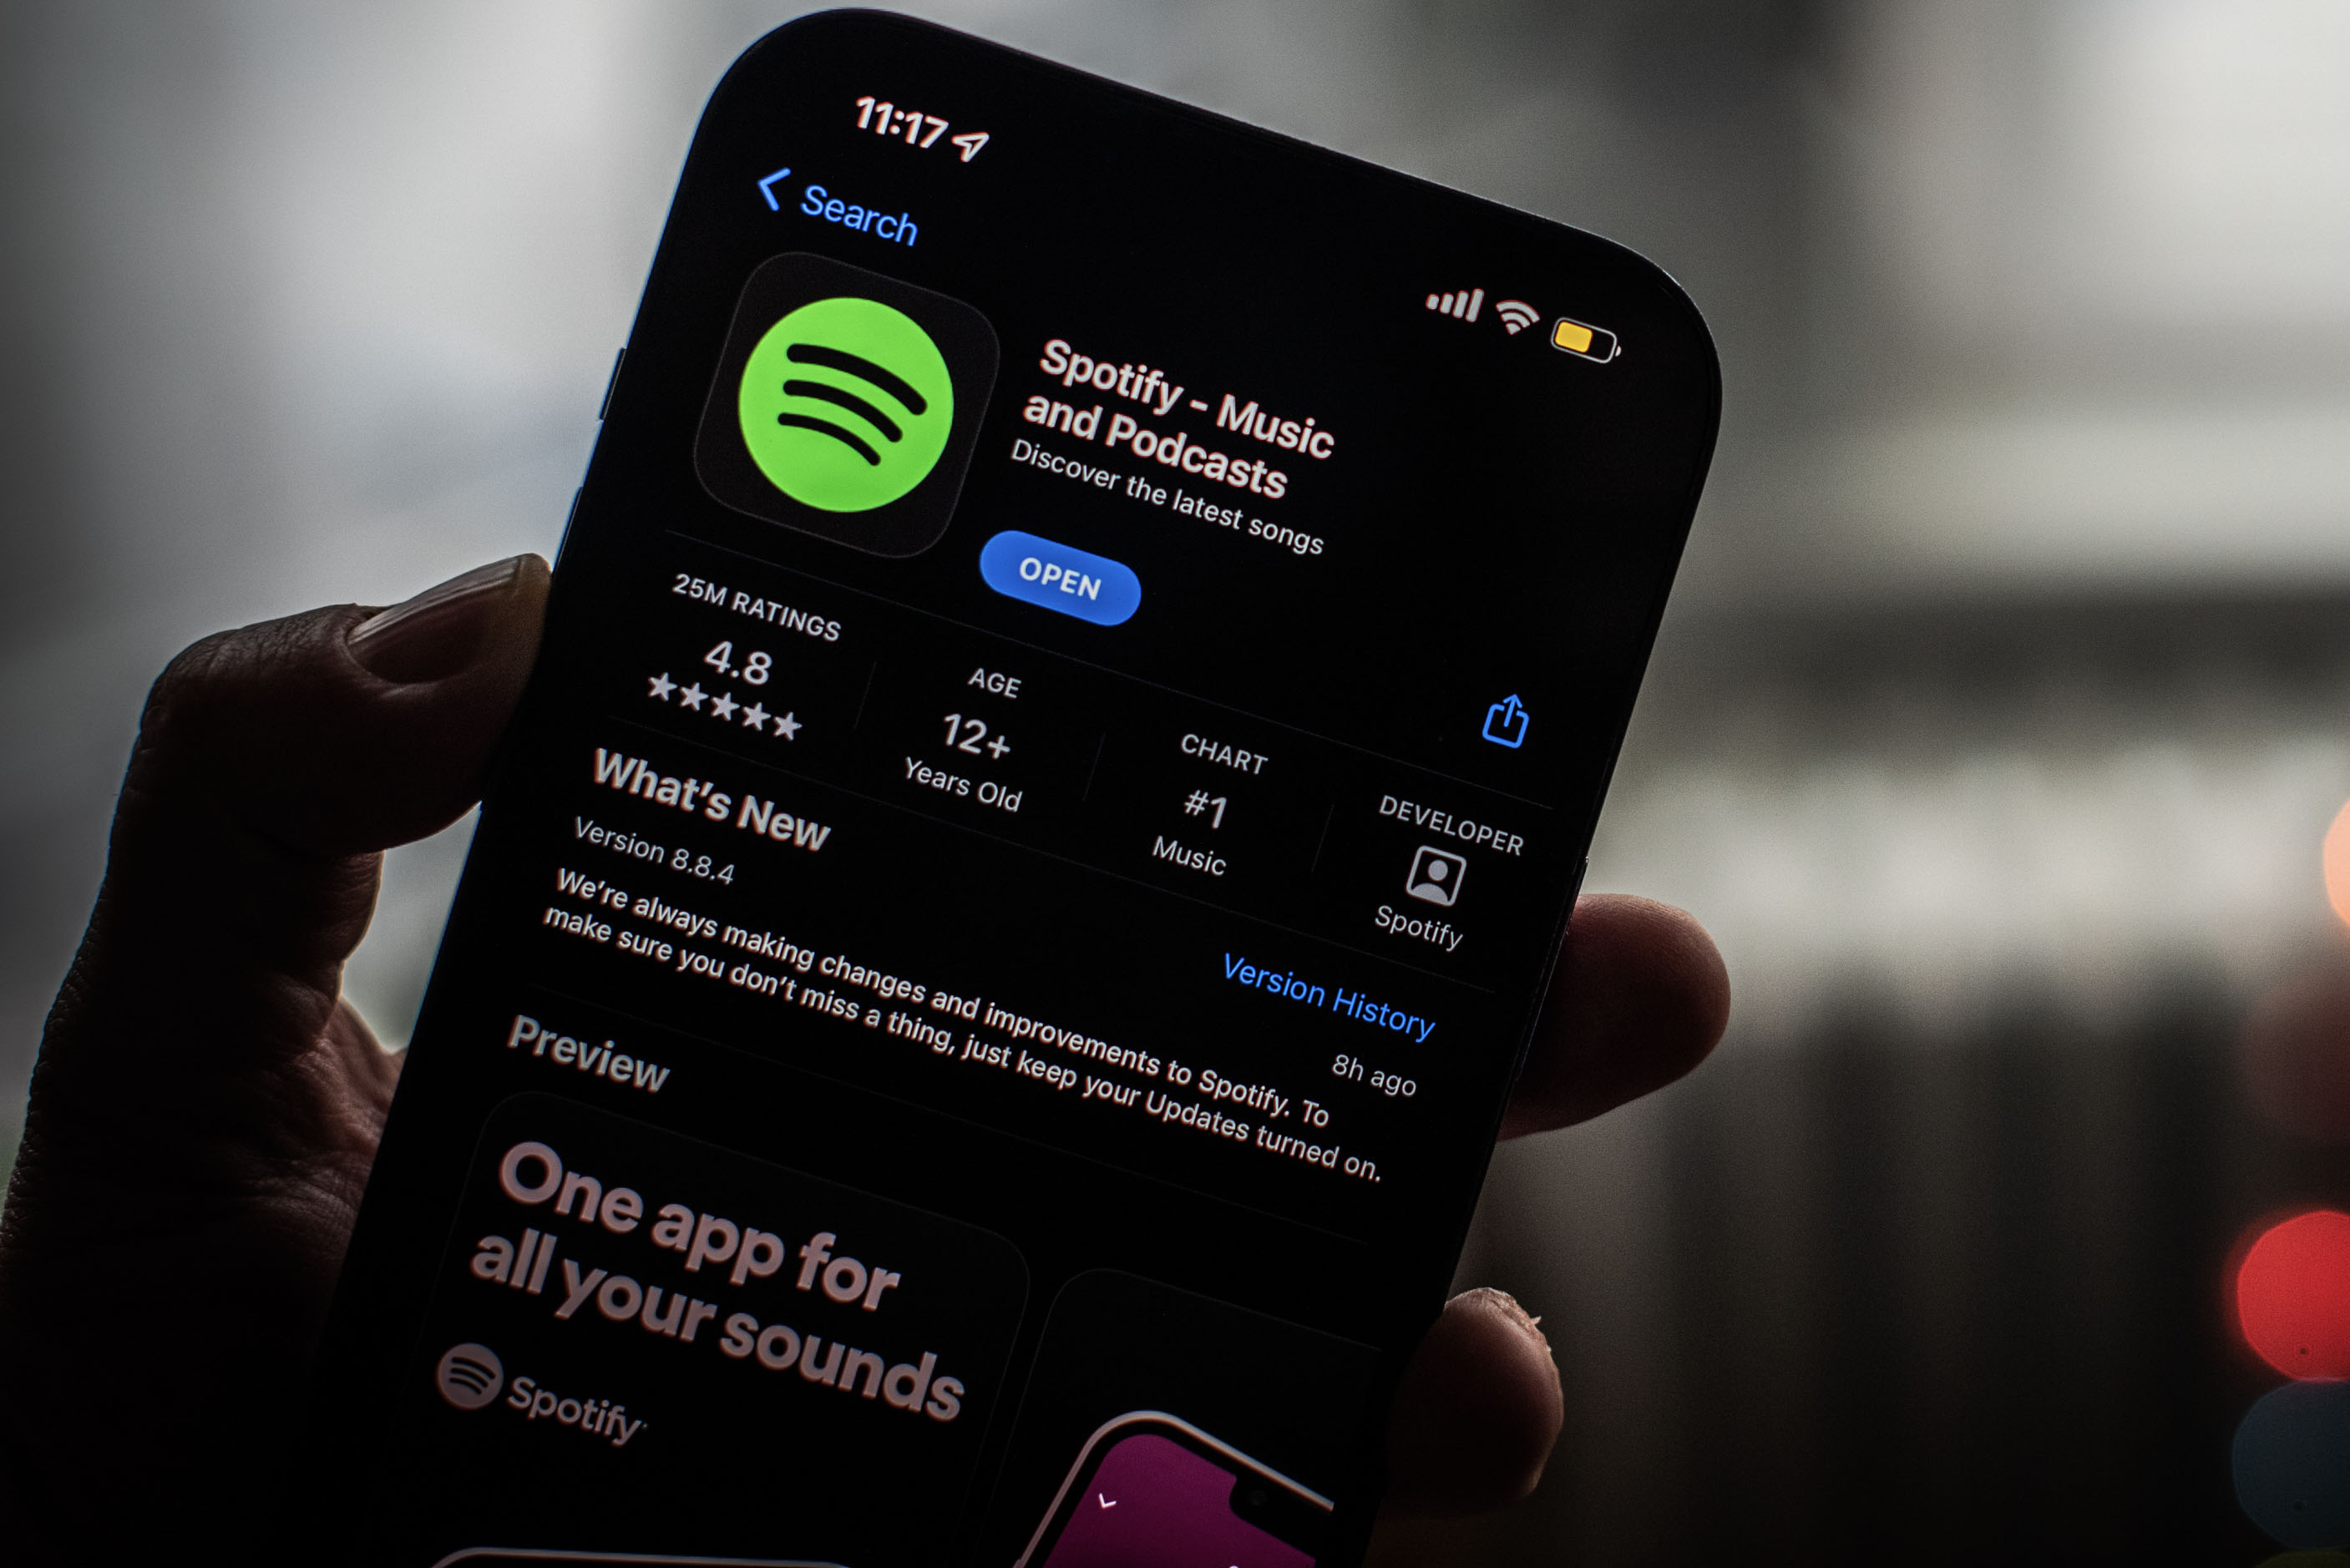 Introducing Clips: Get Started with Short-Form Video on Spotify